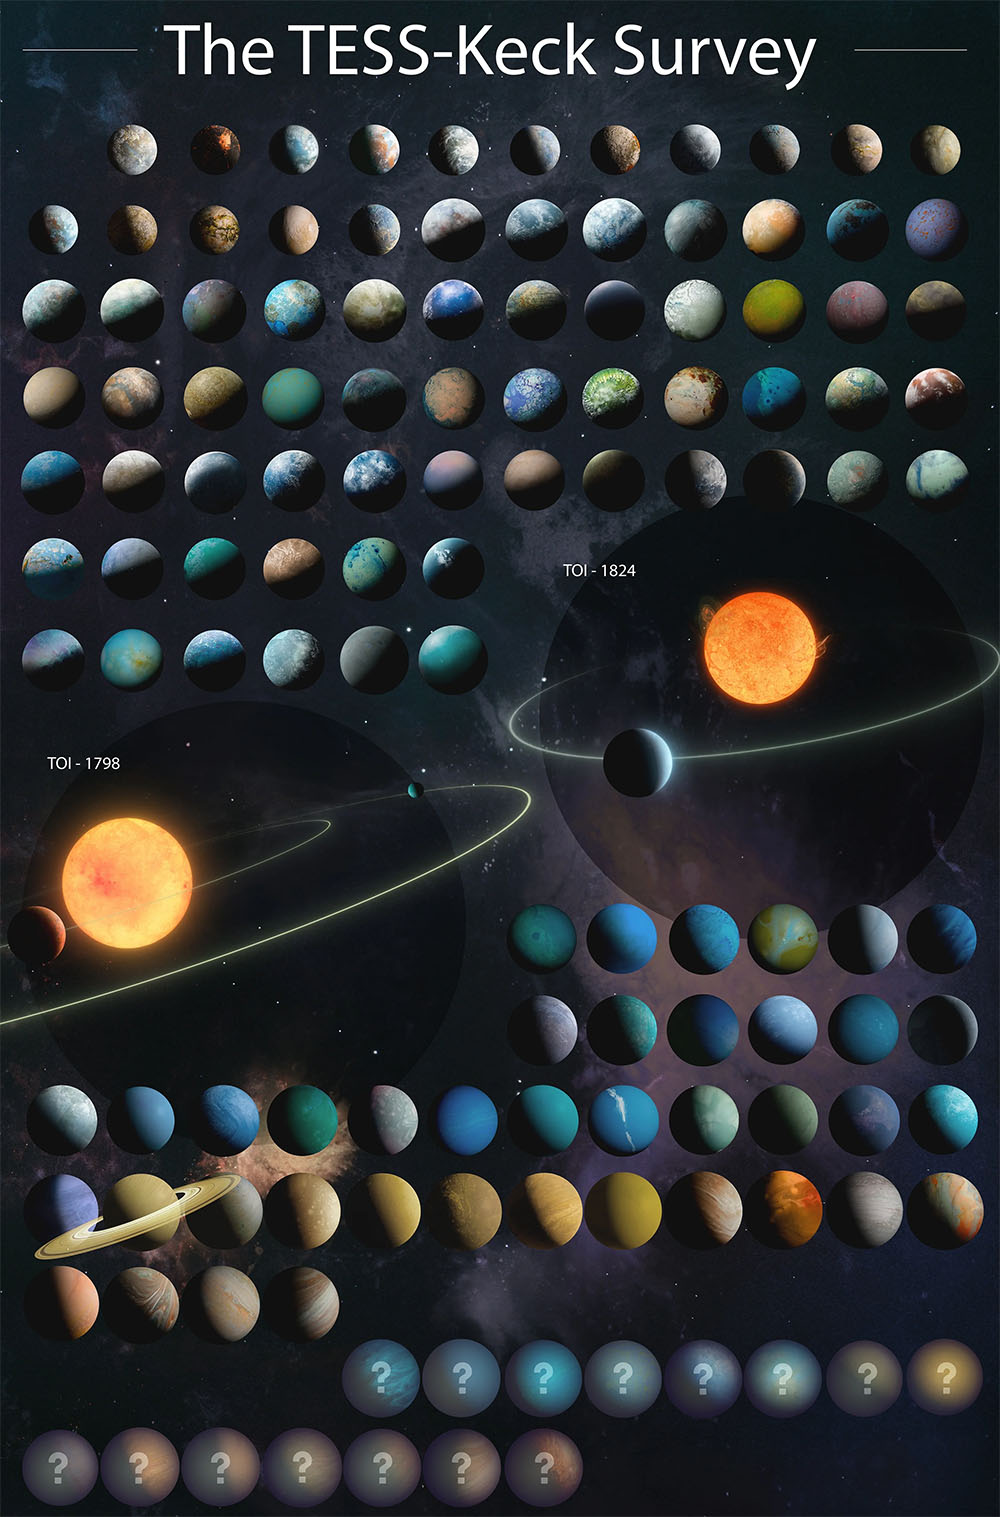 Artist conception of 126 planets in the latest TESS-Keck Survey catalog is based on data including planet radius, mass, density, and temperature